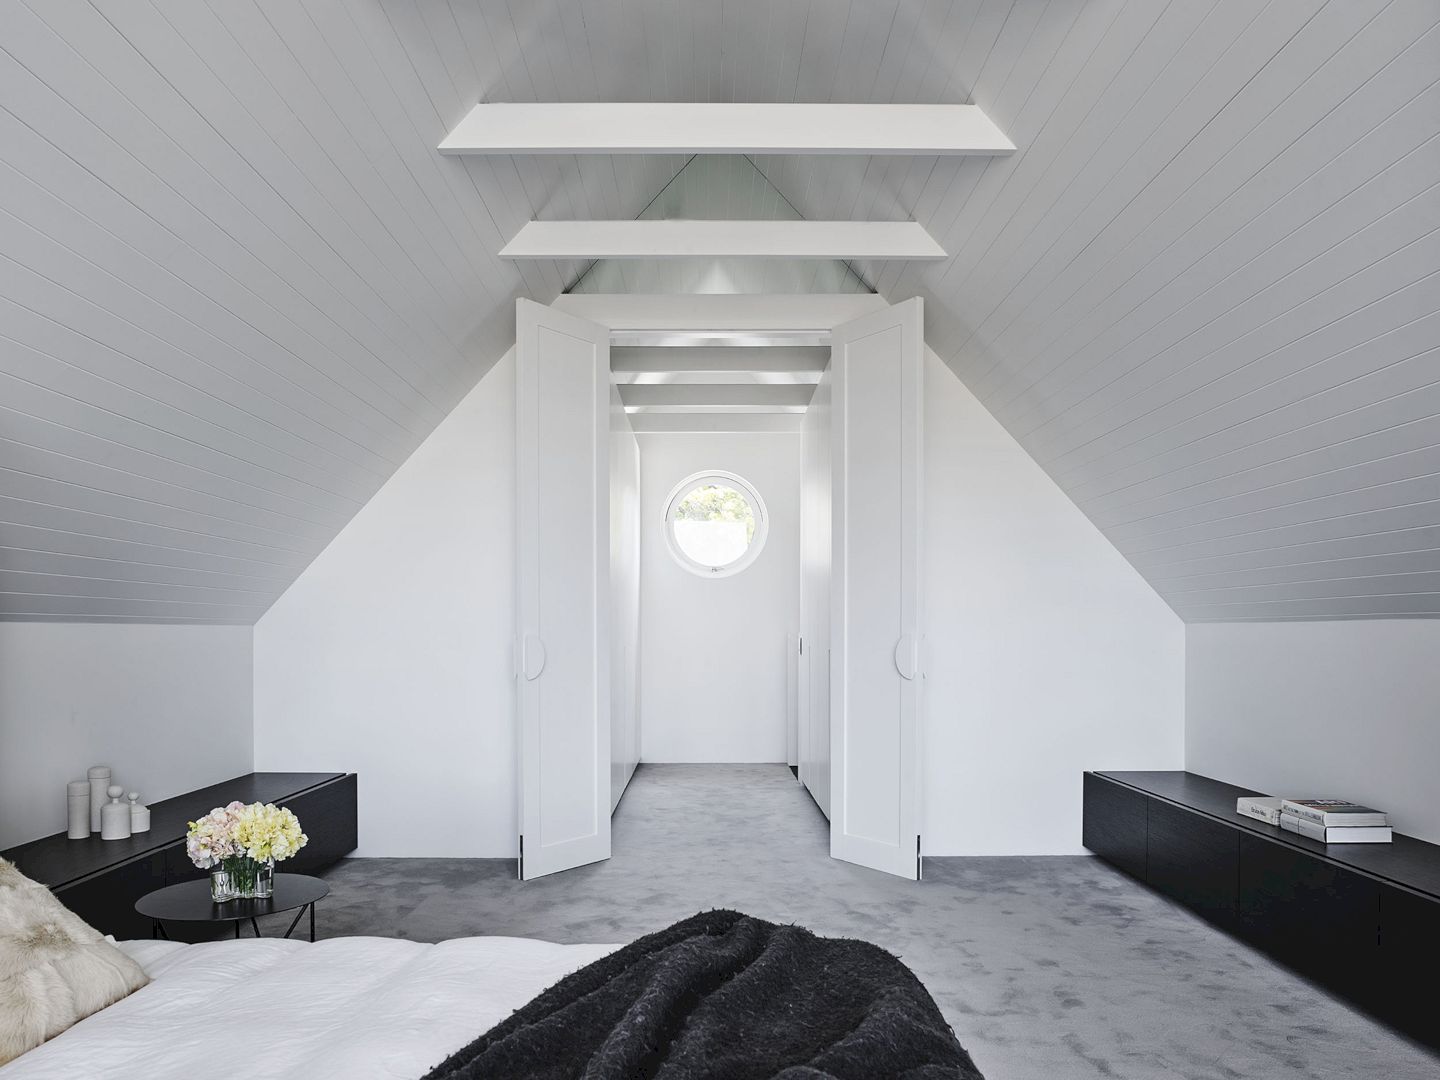 Attic House By Madeleine Blanchfield Architects 2